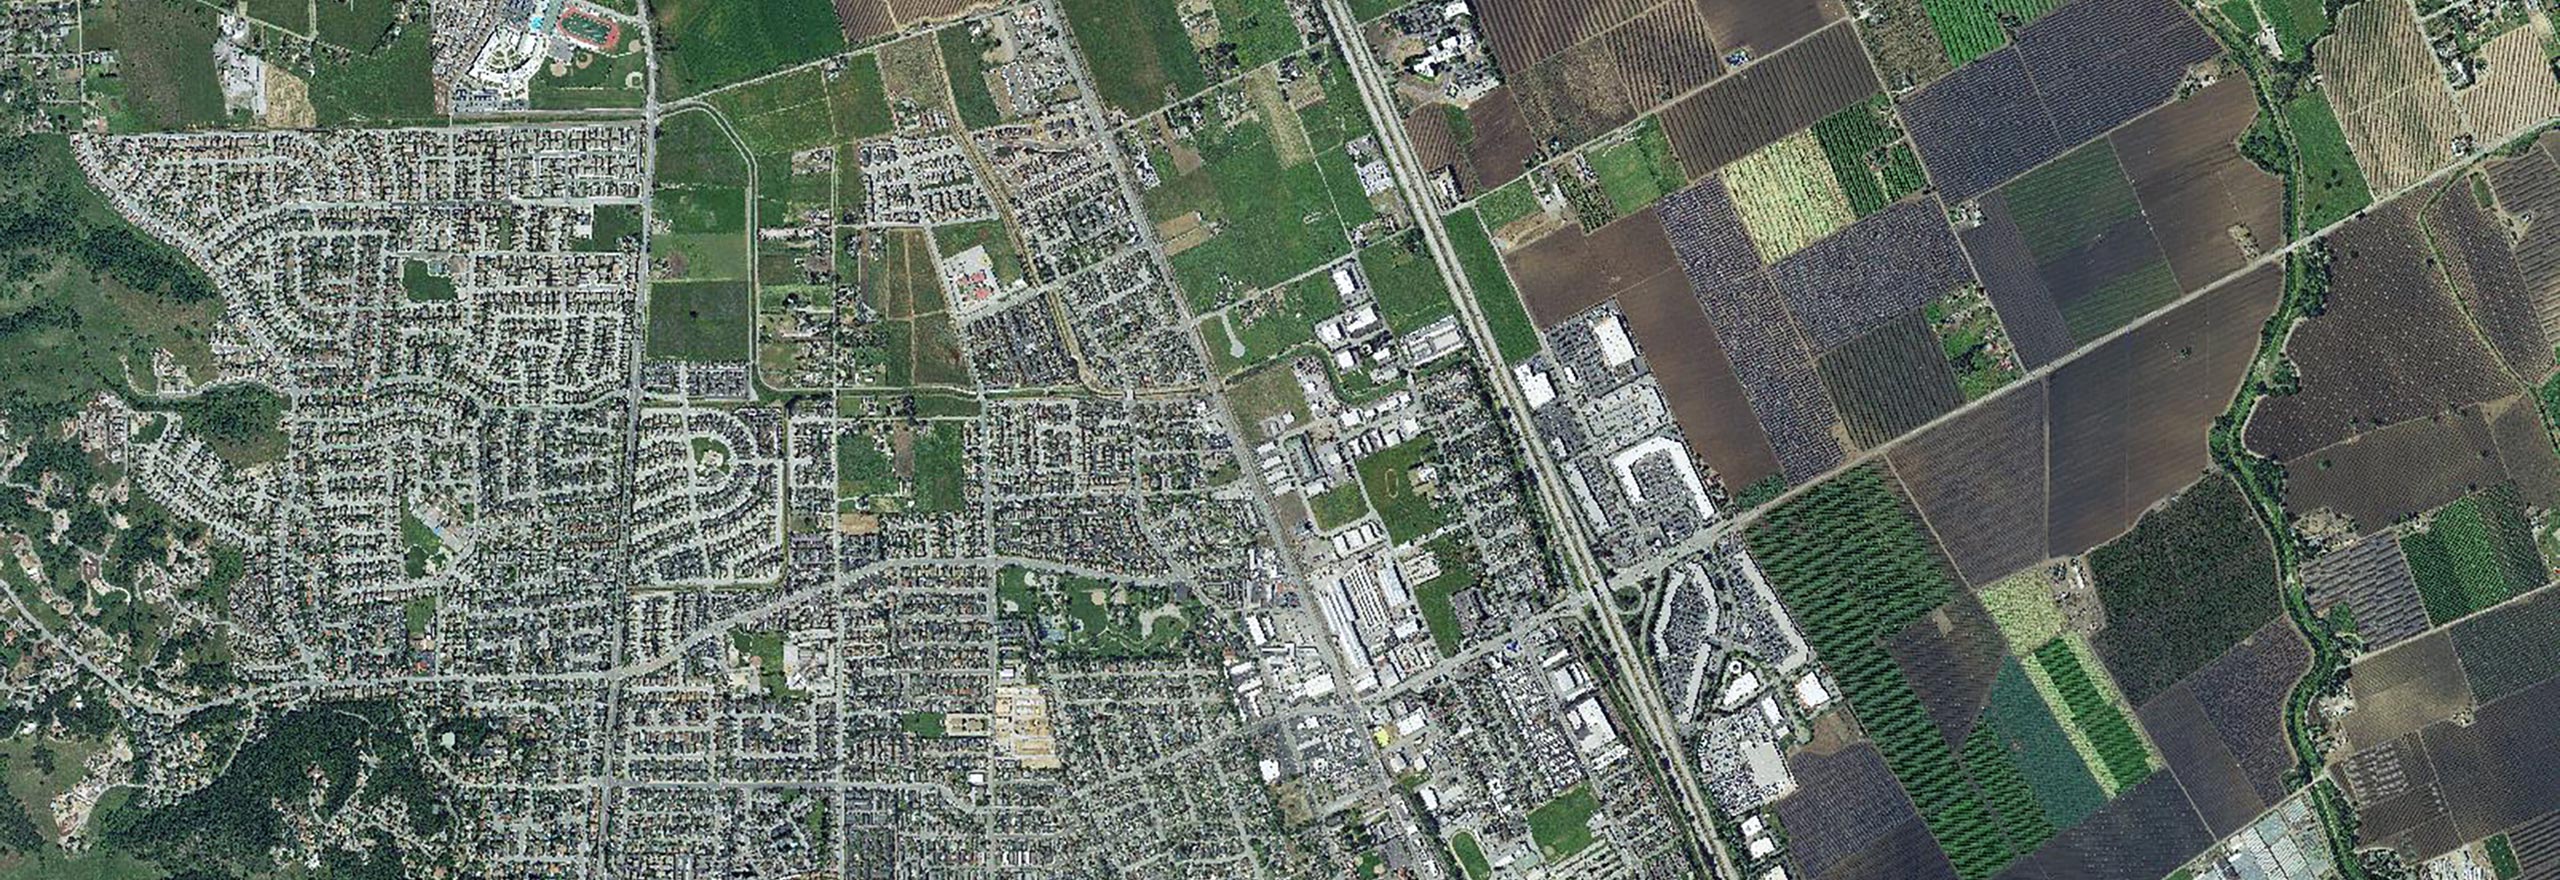 Satellite view of suburban area with agricultural land nearby